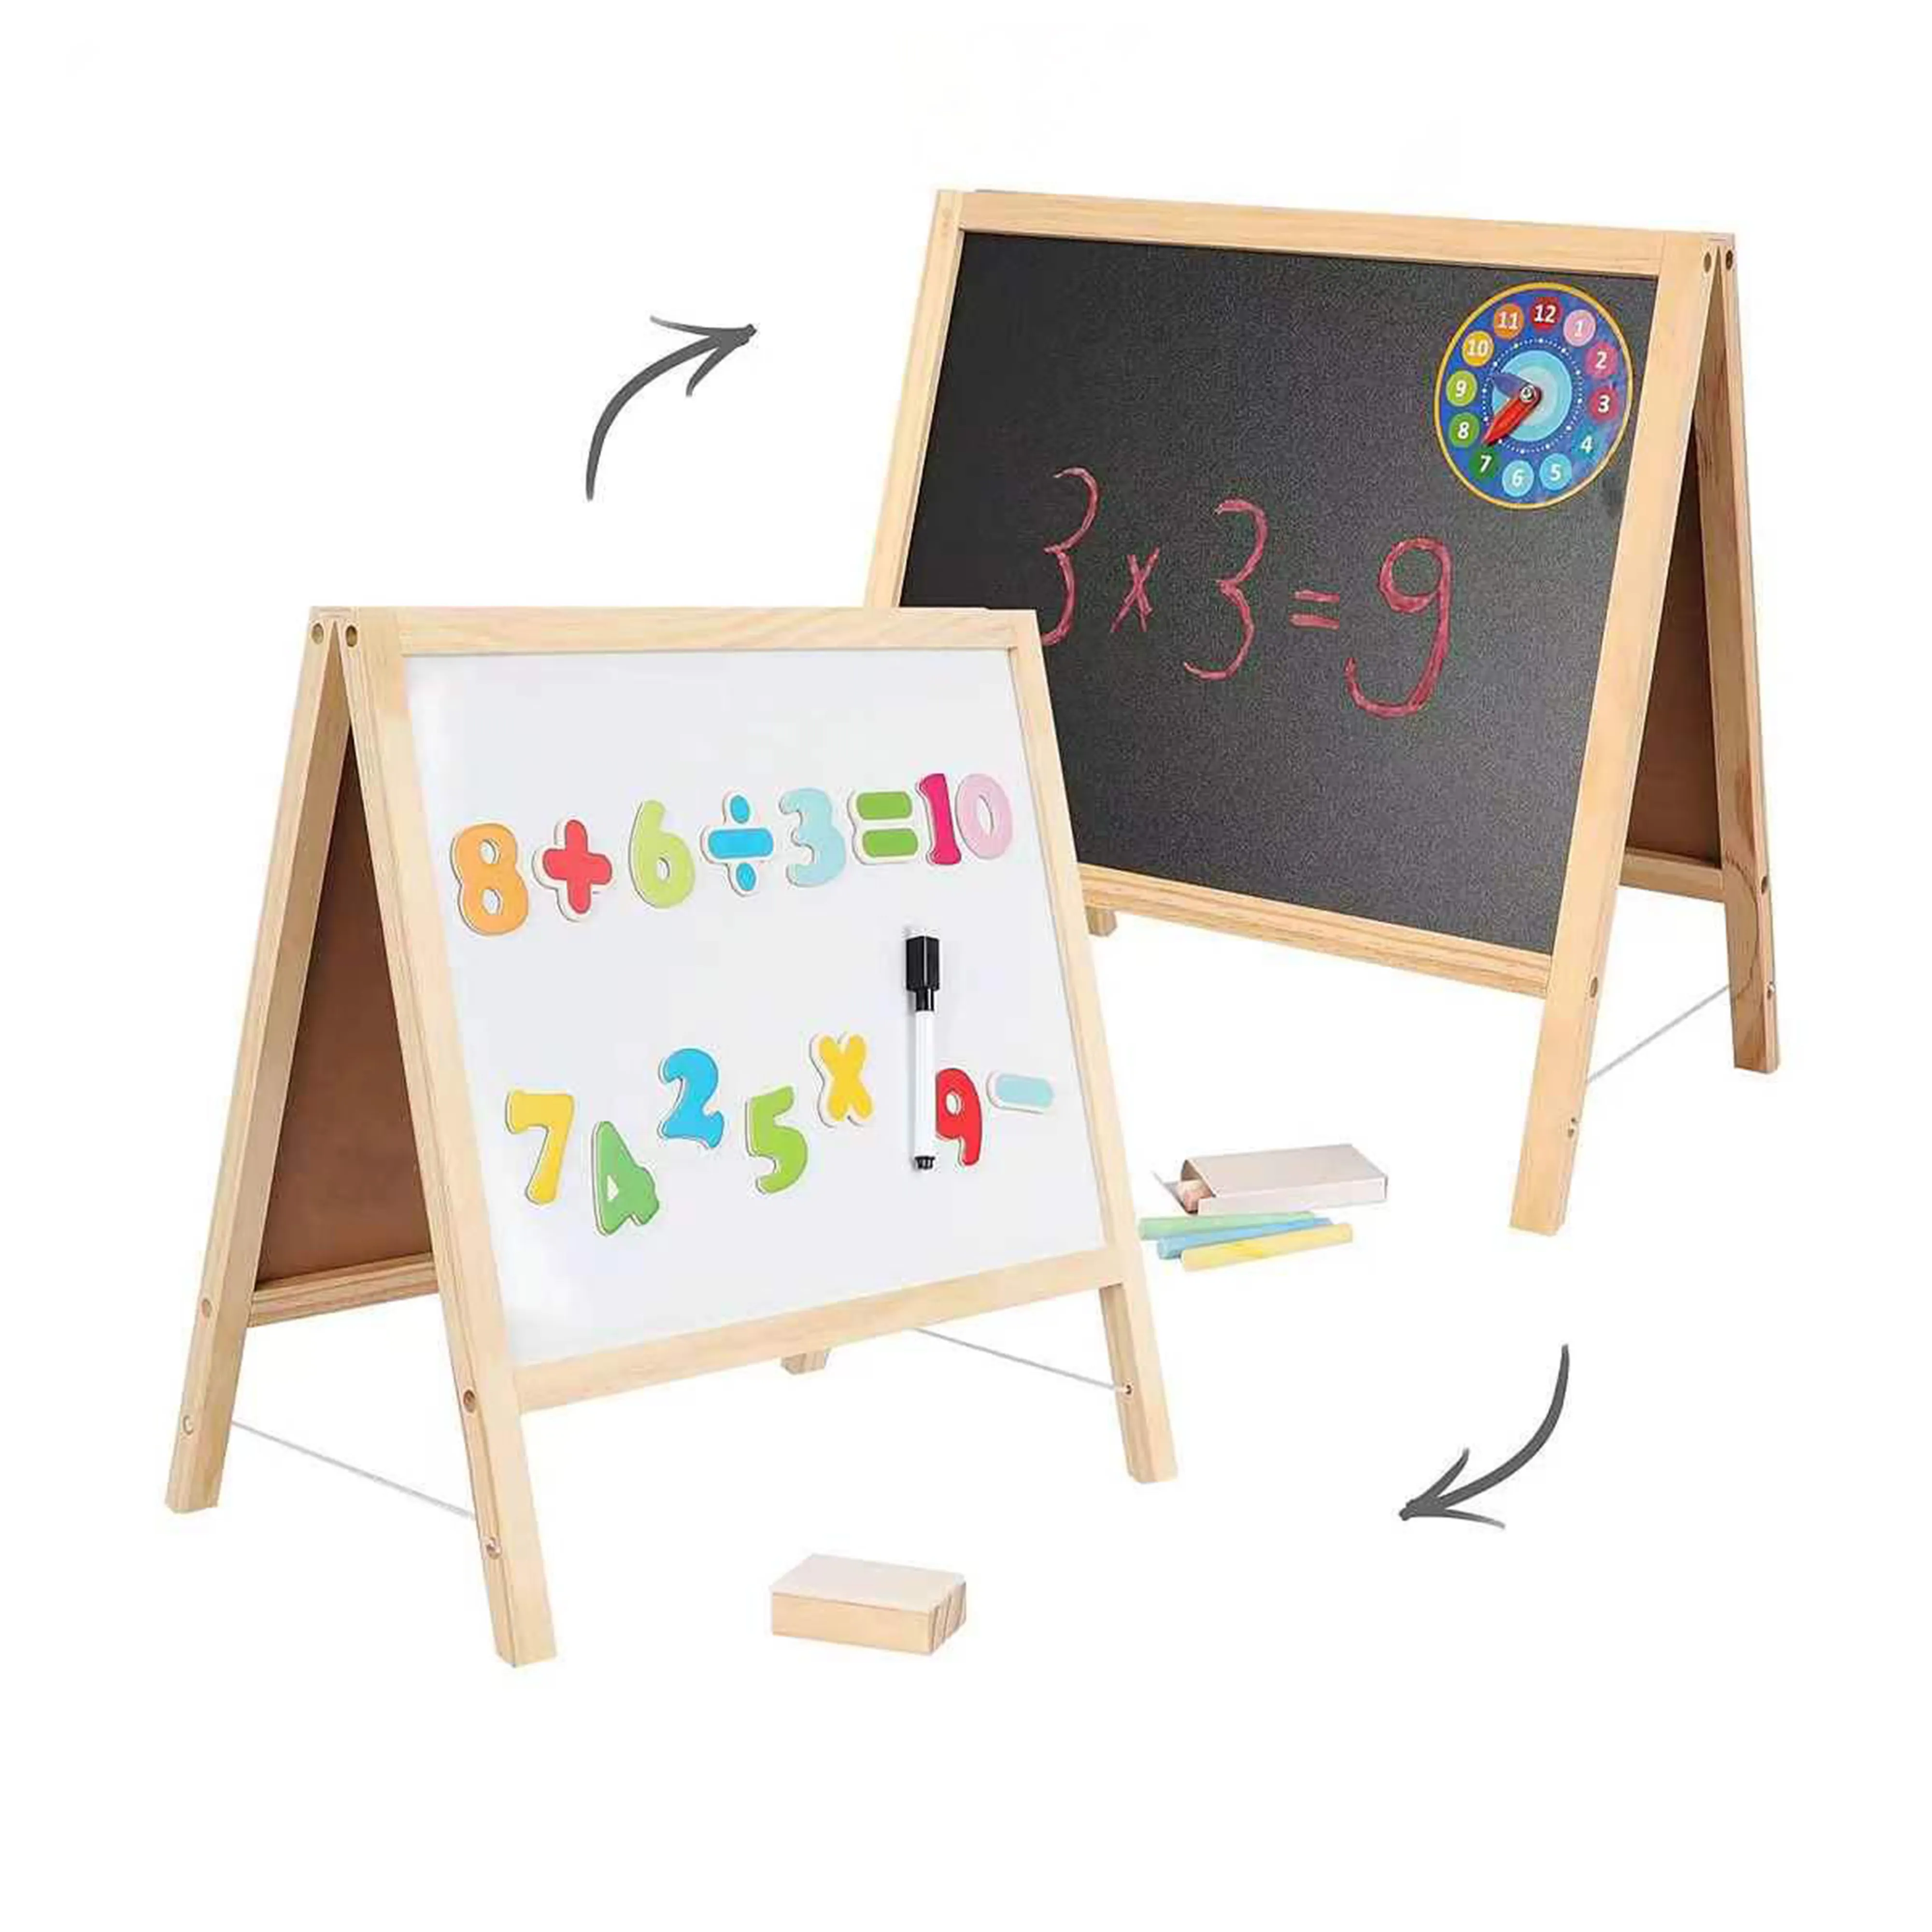 Wood Double Sided Foldable Tabletop Easel Activity Set for Kids Magnetic Erase Whiteboard Chalkboard Toddlers Easel